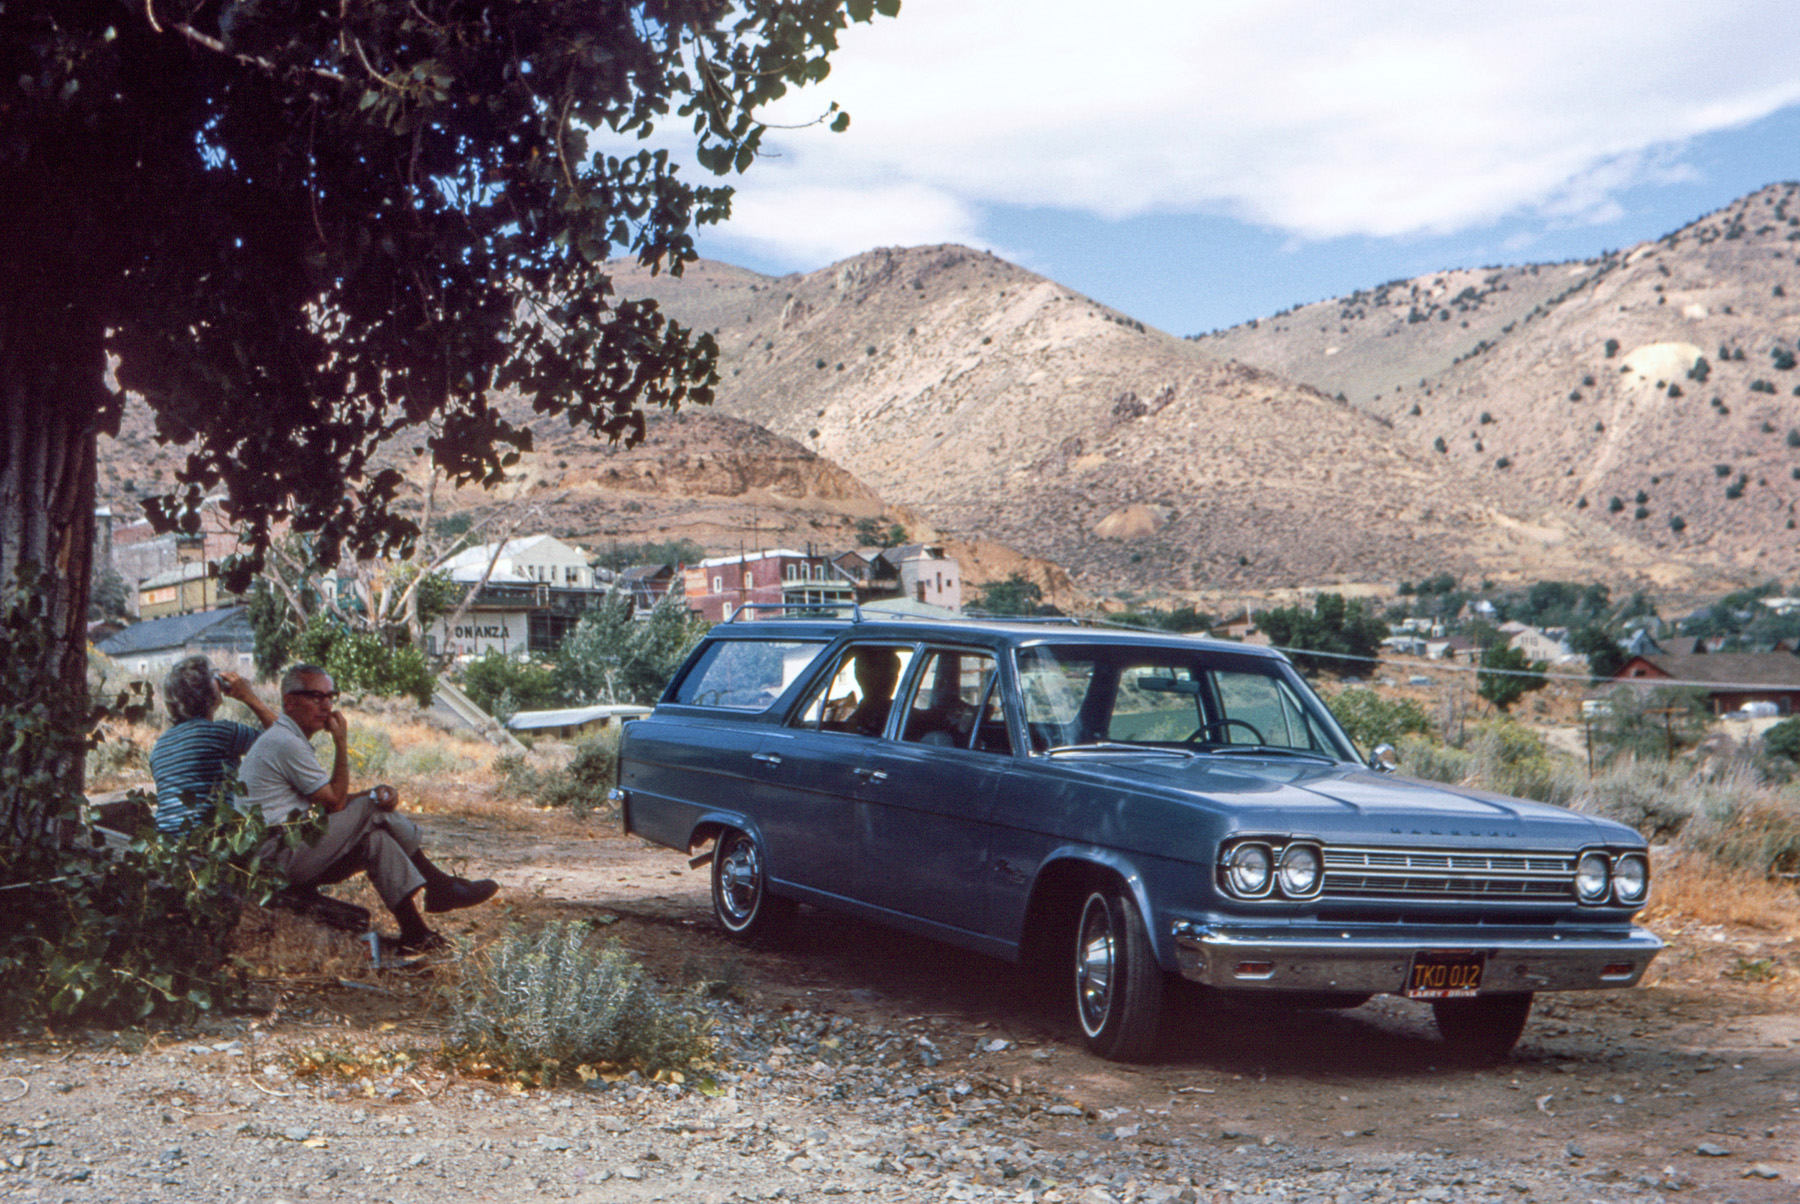 August 1966. Our brand-new Rambler Cross Country wagon on its first road trip, parked at the corner of Taylor and H Streets in Virginia City, Nevada. My mother swills Kool-Aid, my father picks his teeth, my brother occupies the back seat, and I click off this Kodachrome slide. View full size.